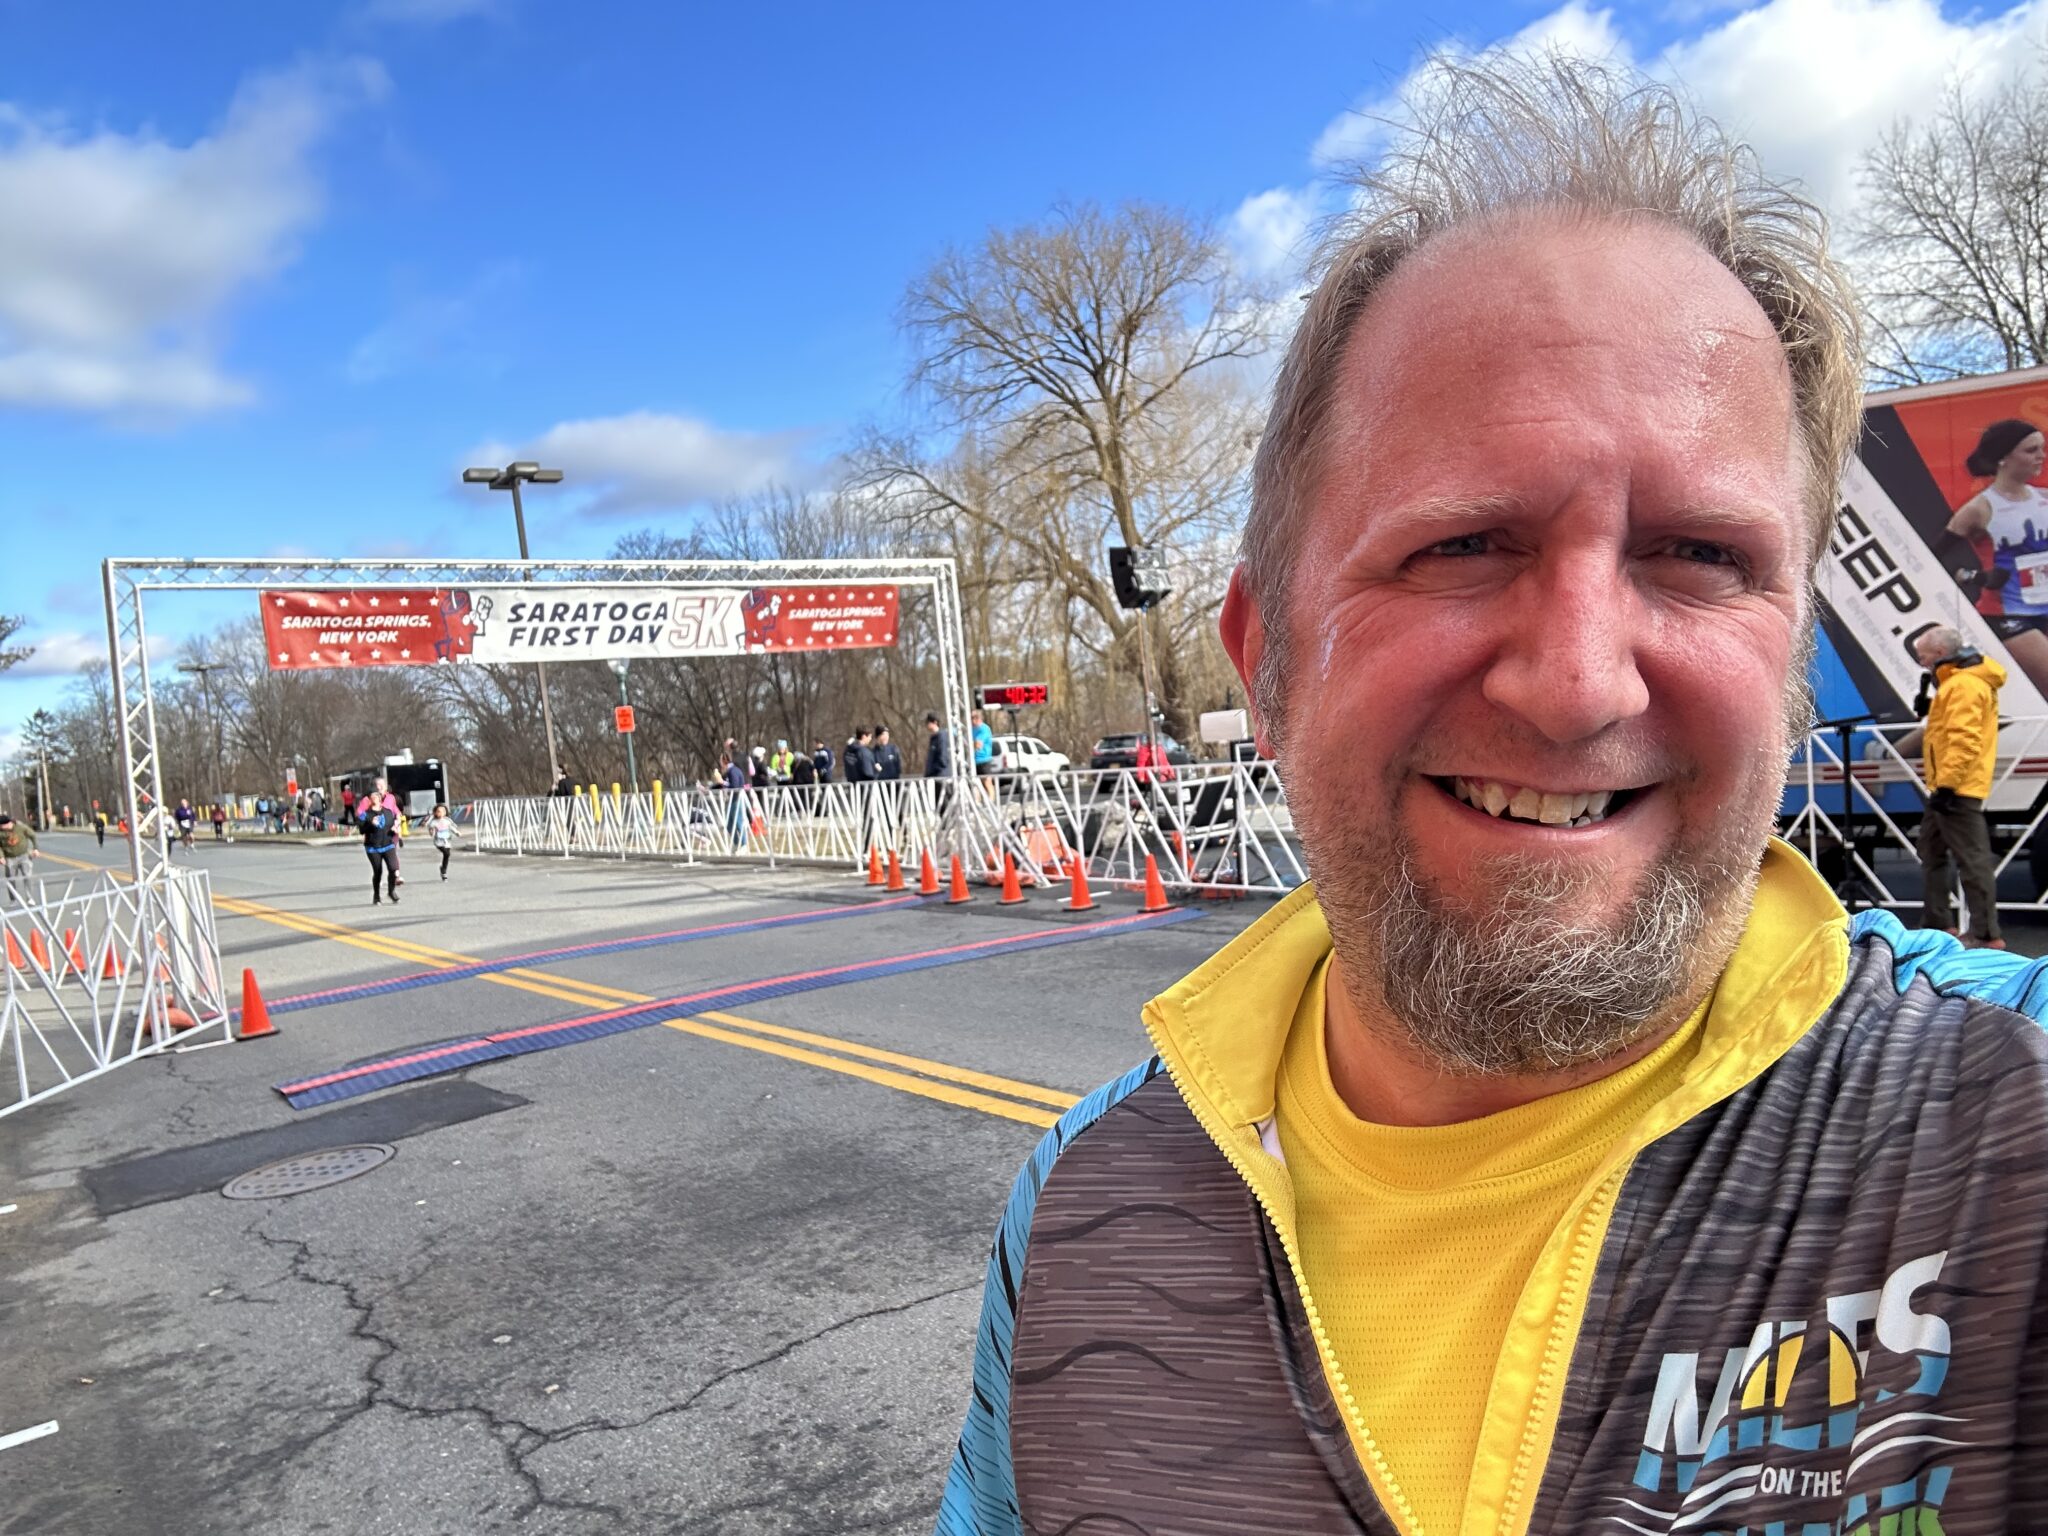 Smiling man with red face and a goatee wearing athletic clothing. In the background is the finish line of a race with a banner that reads, "Saratoga First Day 5K" and "Saratoga Springs, New York".